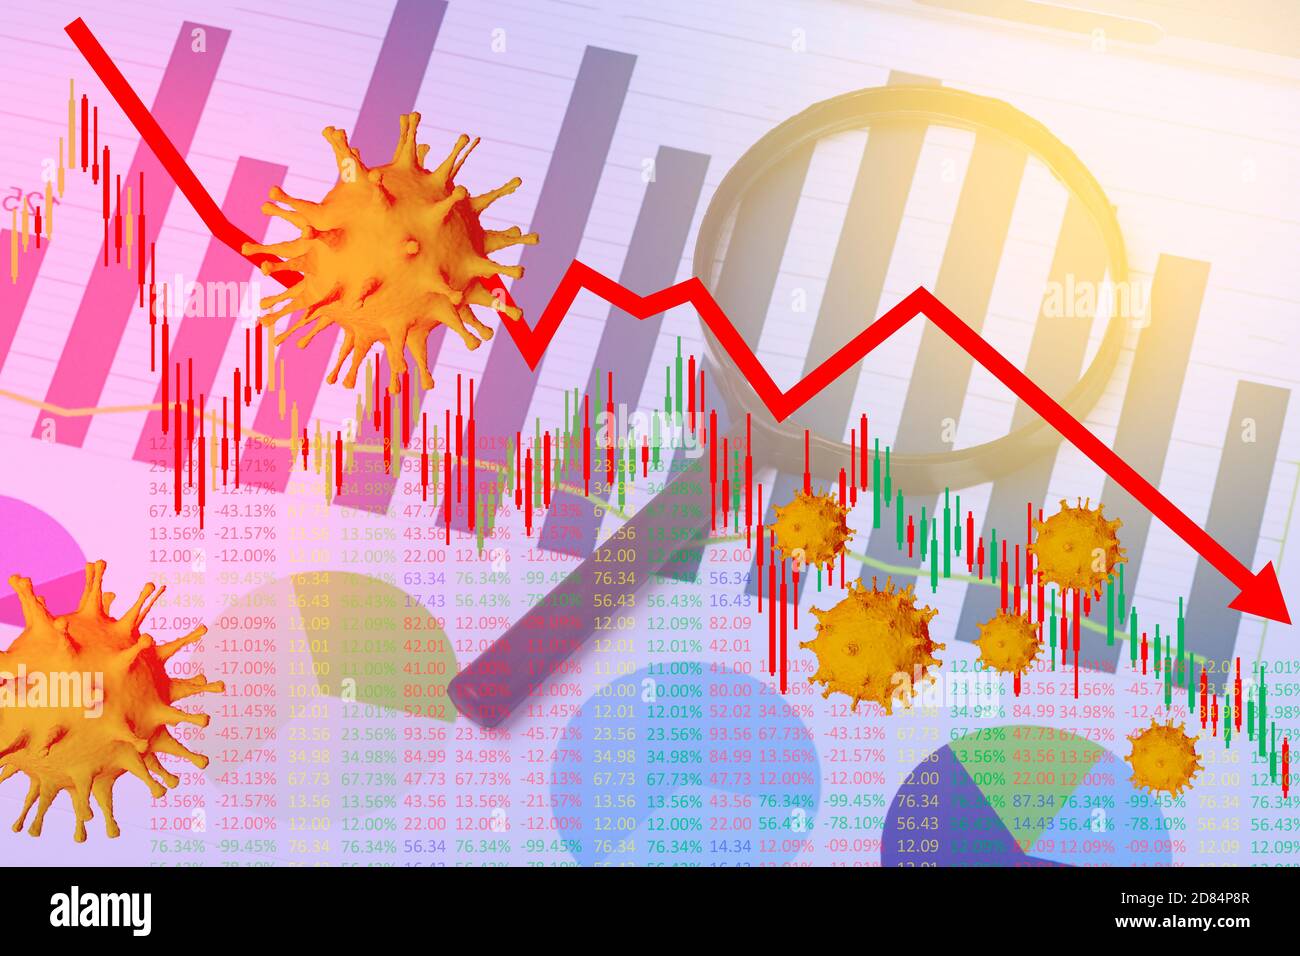 Economic crisis due to the coronavirus. Charts of the stock market crash caused by COVID-19. The impact of coronavirus on the stock exchange and the Stock Photo